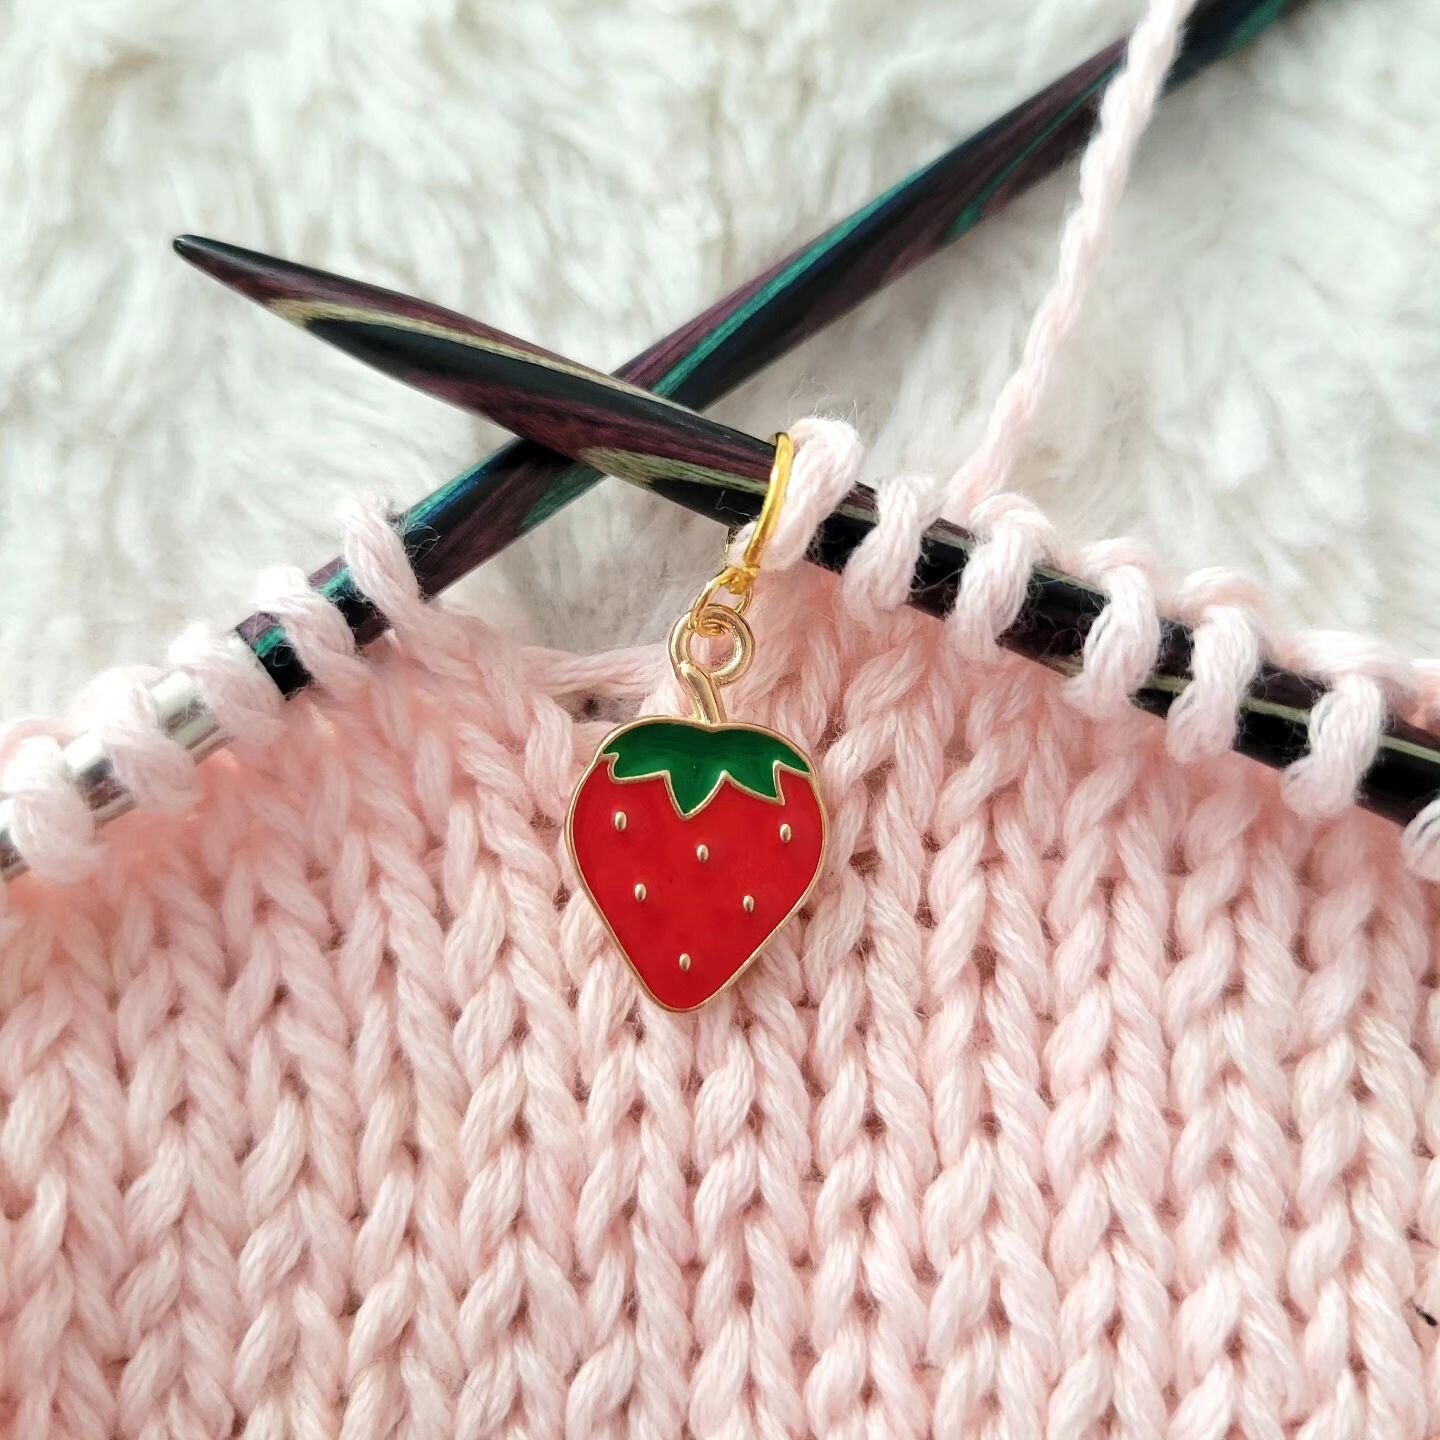 Strawberry season might be coming to an end but that doesn't mean you can't keep knitting with cute strawberry stitch markers!